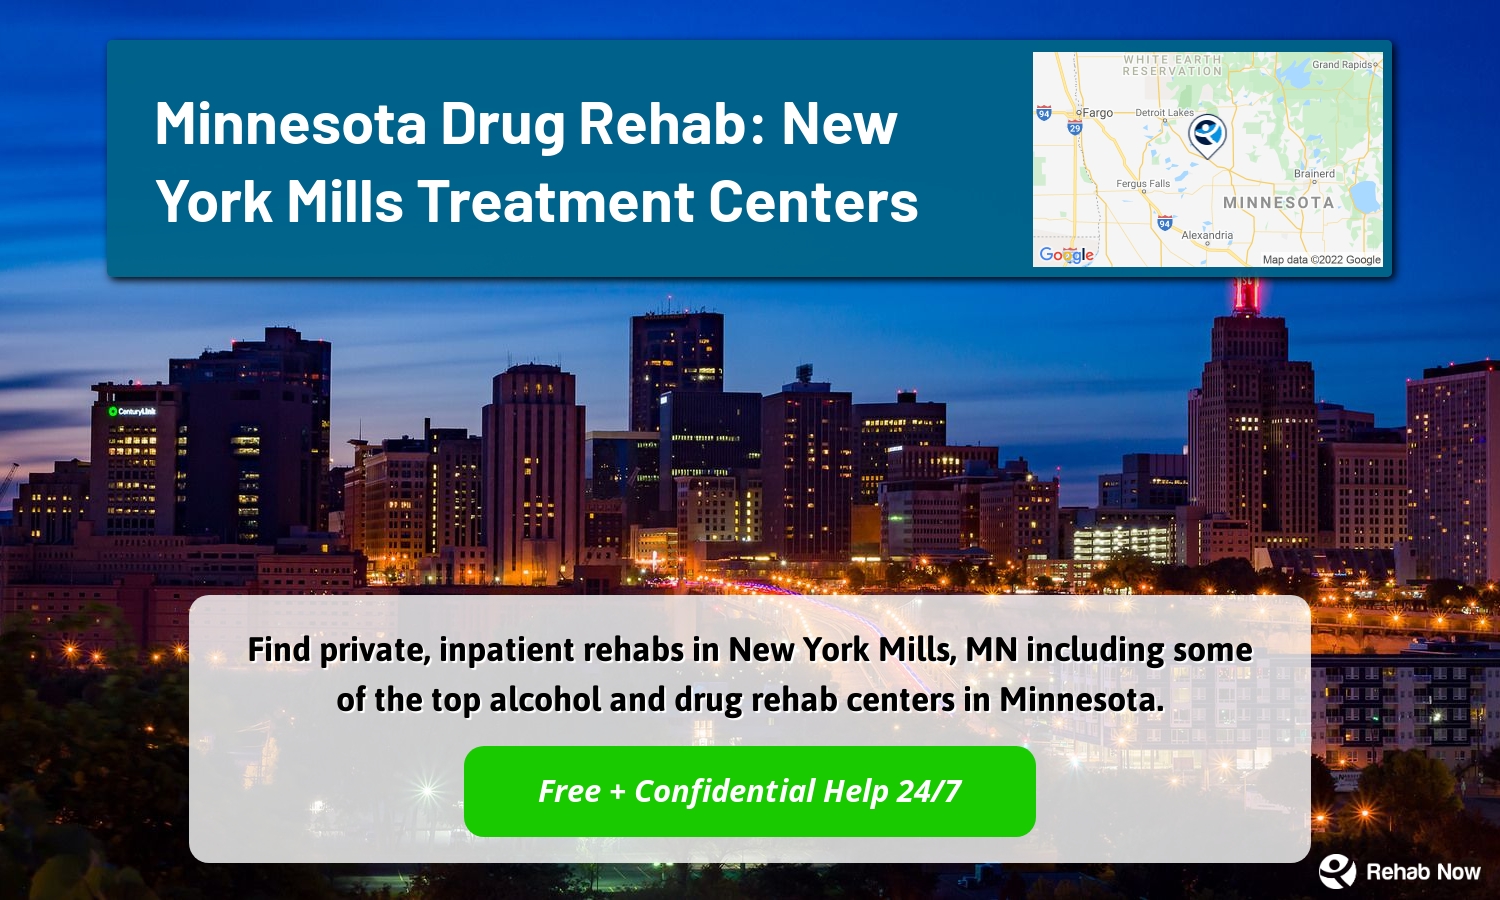 Find private, inpatient rehabs in New York Mills, MN including some of the top alcohol and drug rehab centers in Minnesota.